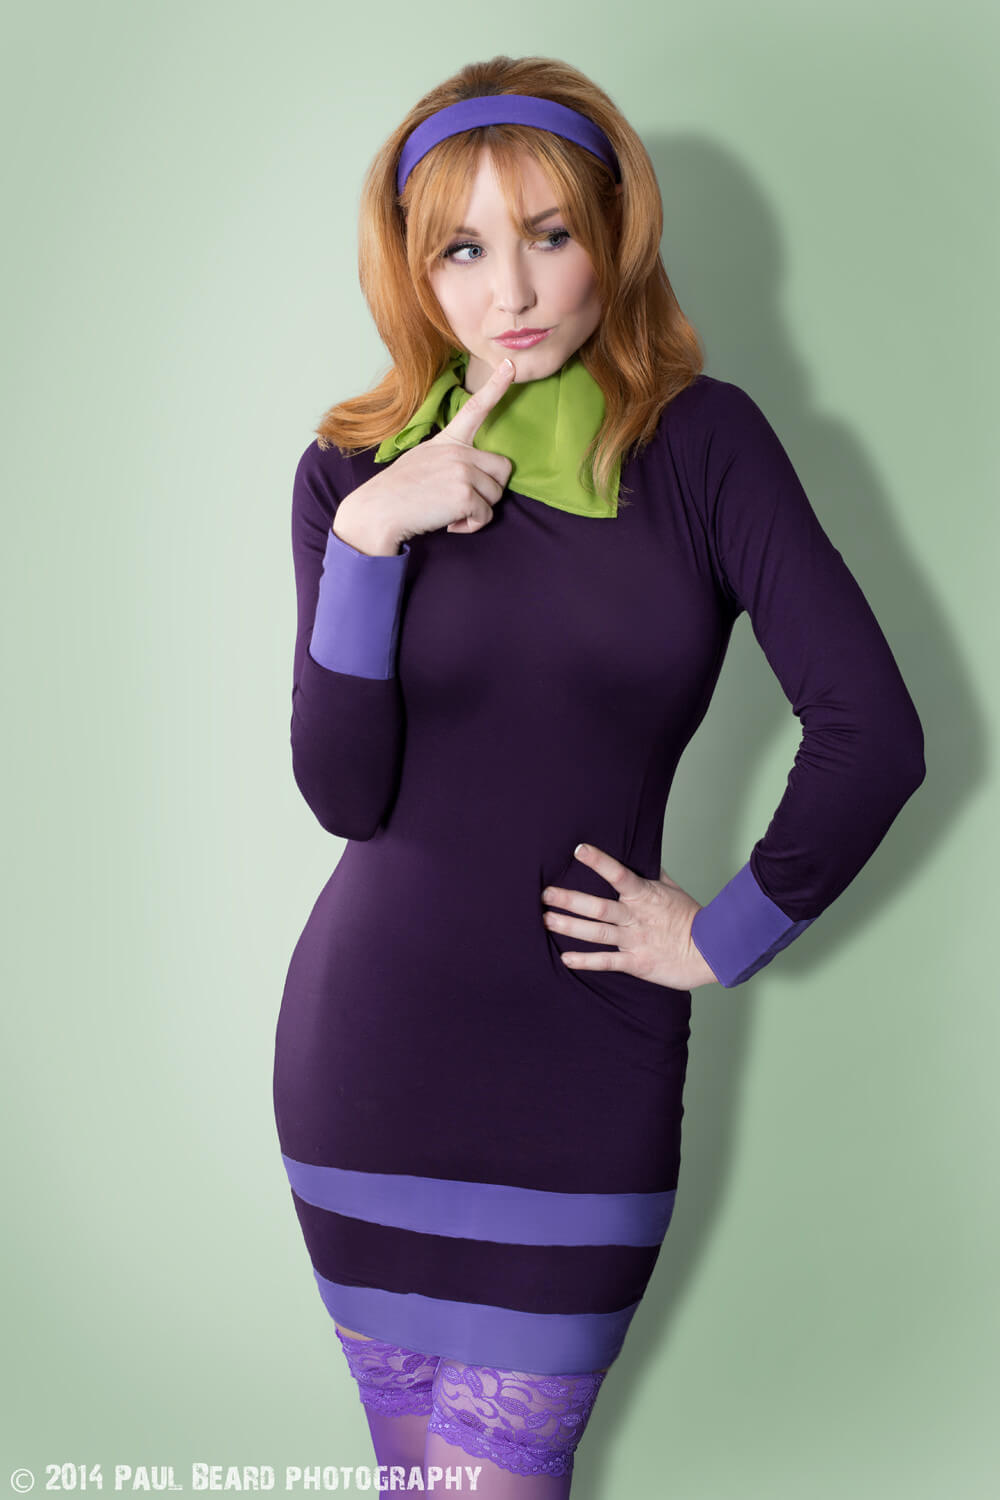 70+ Hot Pictures Of Daphne Blake From Scooby Doo Which Are Sure to Catch Your Attention 25